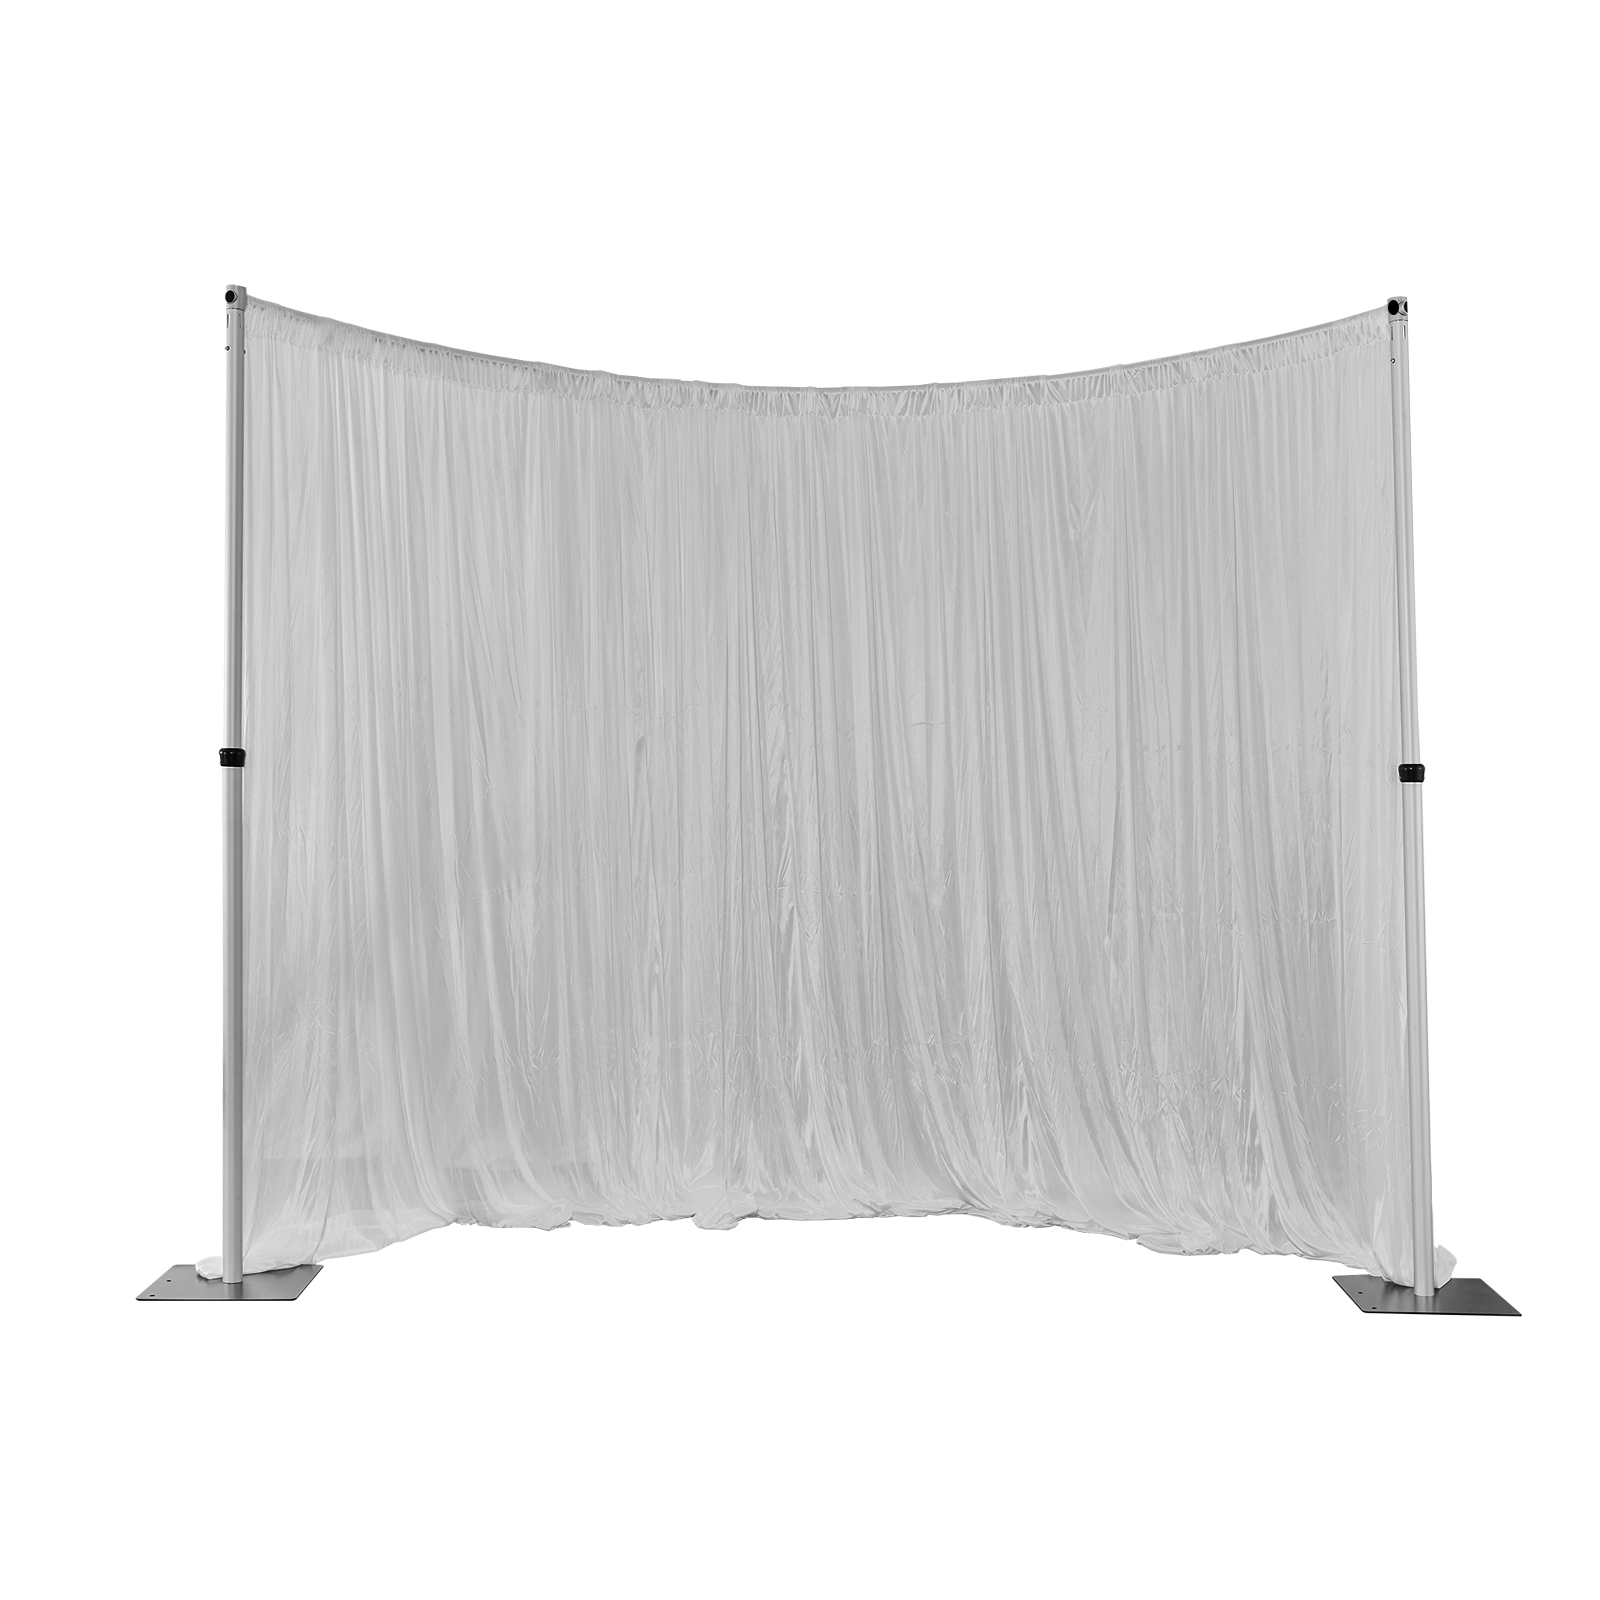 10ftx10ft White Lce Silk Curtains, Backdrop Curtain With Rod Pocket